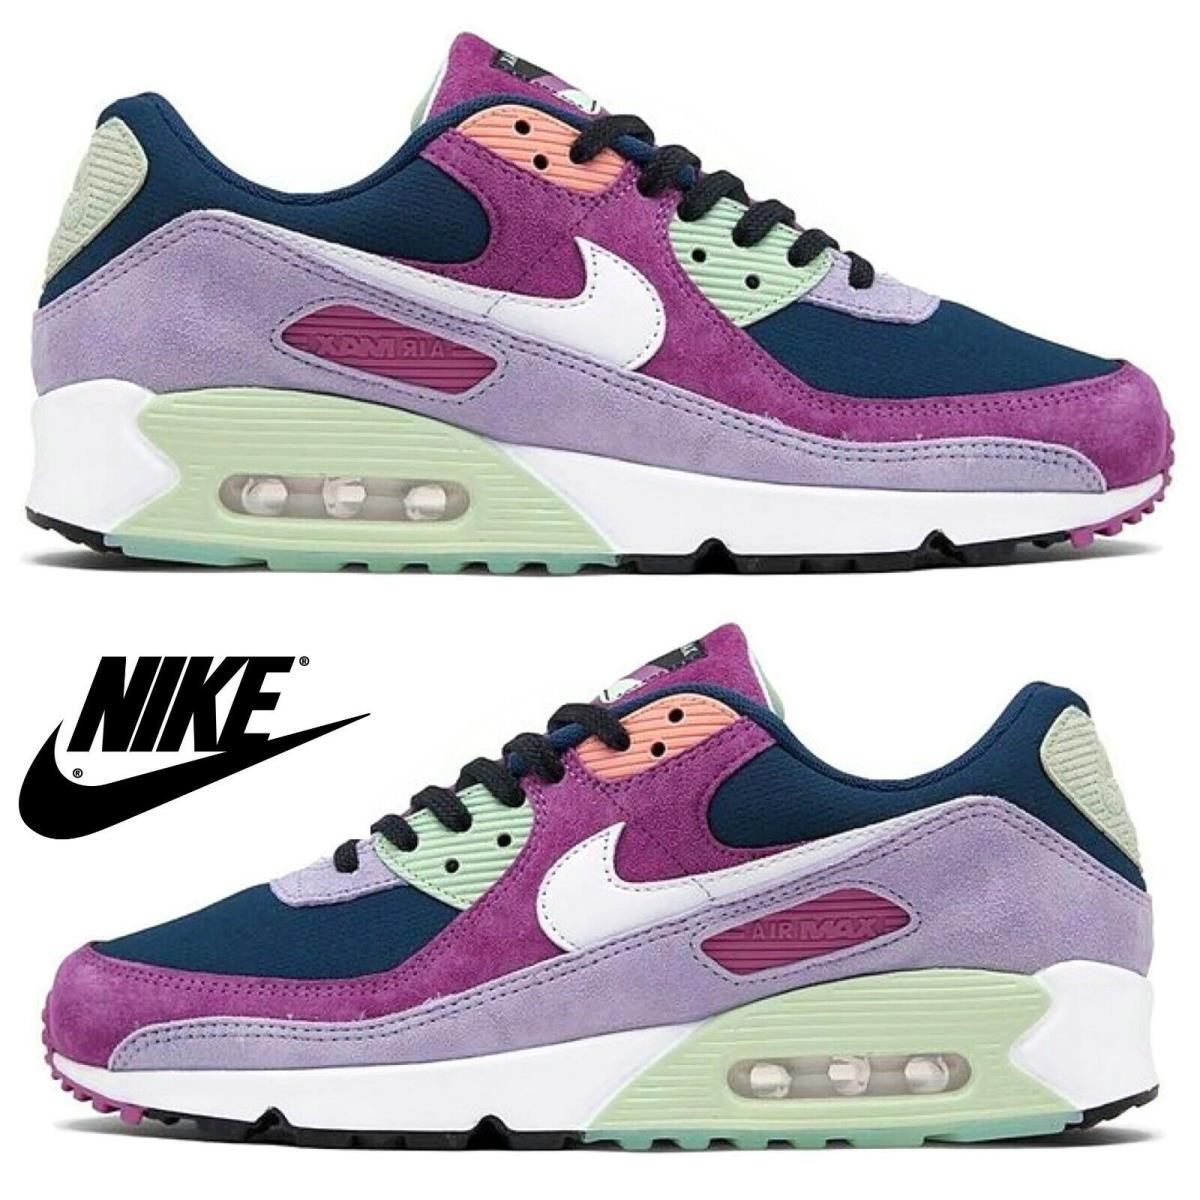 Nike Air Max 90 Casual Men`s Sneakers Running Athletic Sport Comfort Shoes Navy - Purple, Maufacturer: Light Bordeaux/White/Armory Navy